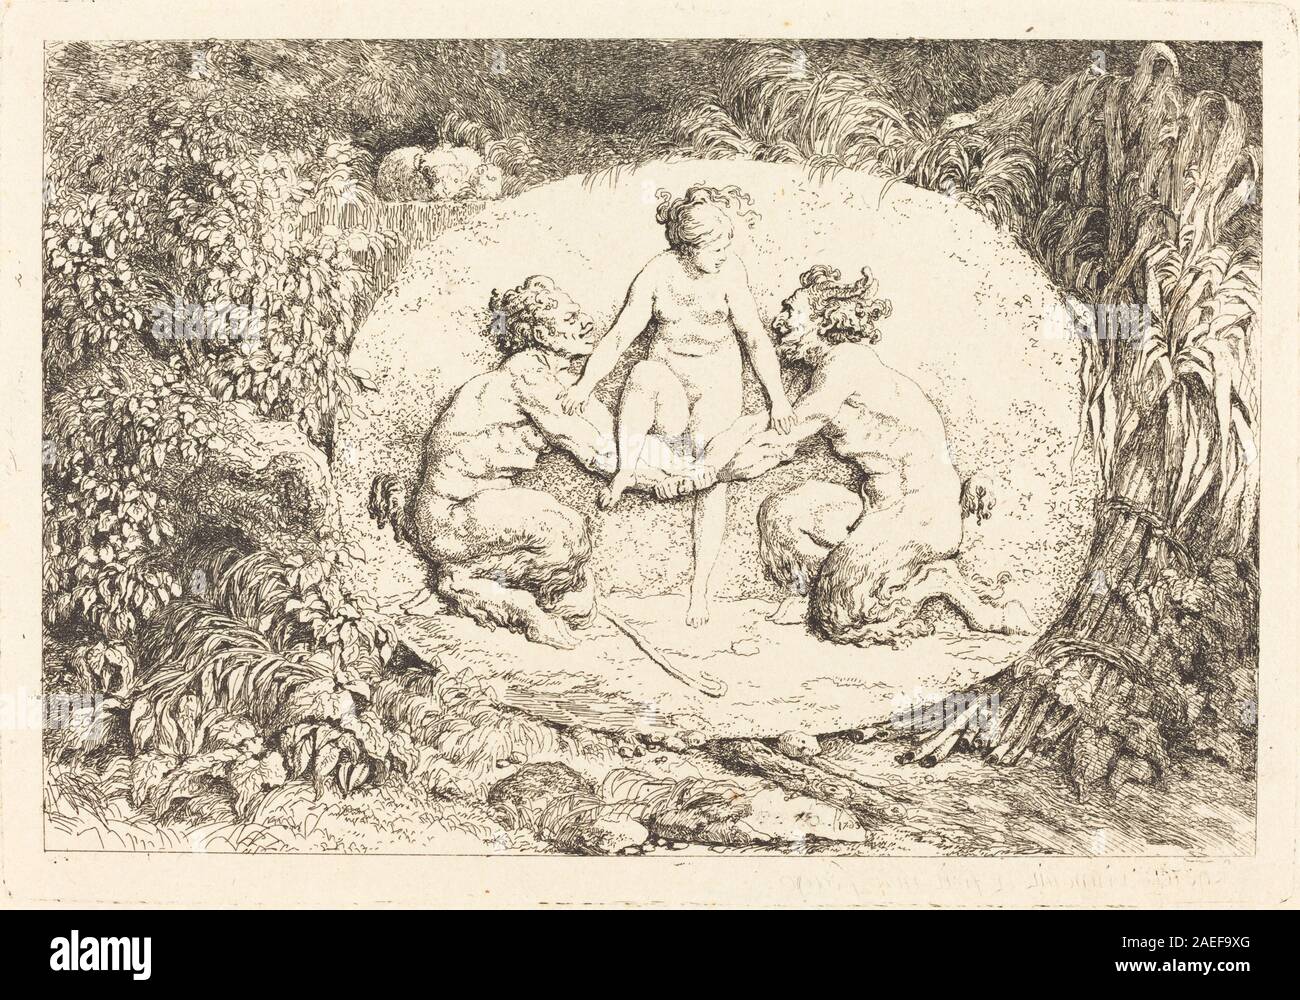 Jean-Honoré Fragonard, Nymph Supported by Two Satyrs (Nymphe s'asseyant sur les mains de deux satyres), 1763 Nymph Supported by Two Satyrs (Nymphe s'asseyant sur les mains de deux satyres); 1763date Stock Photo